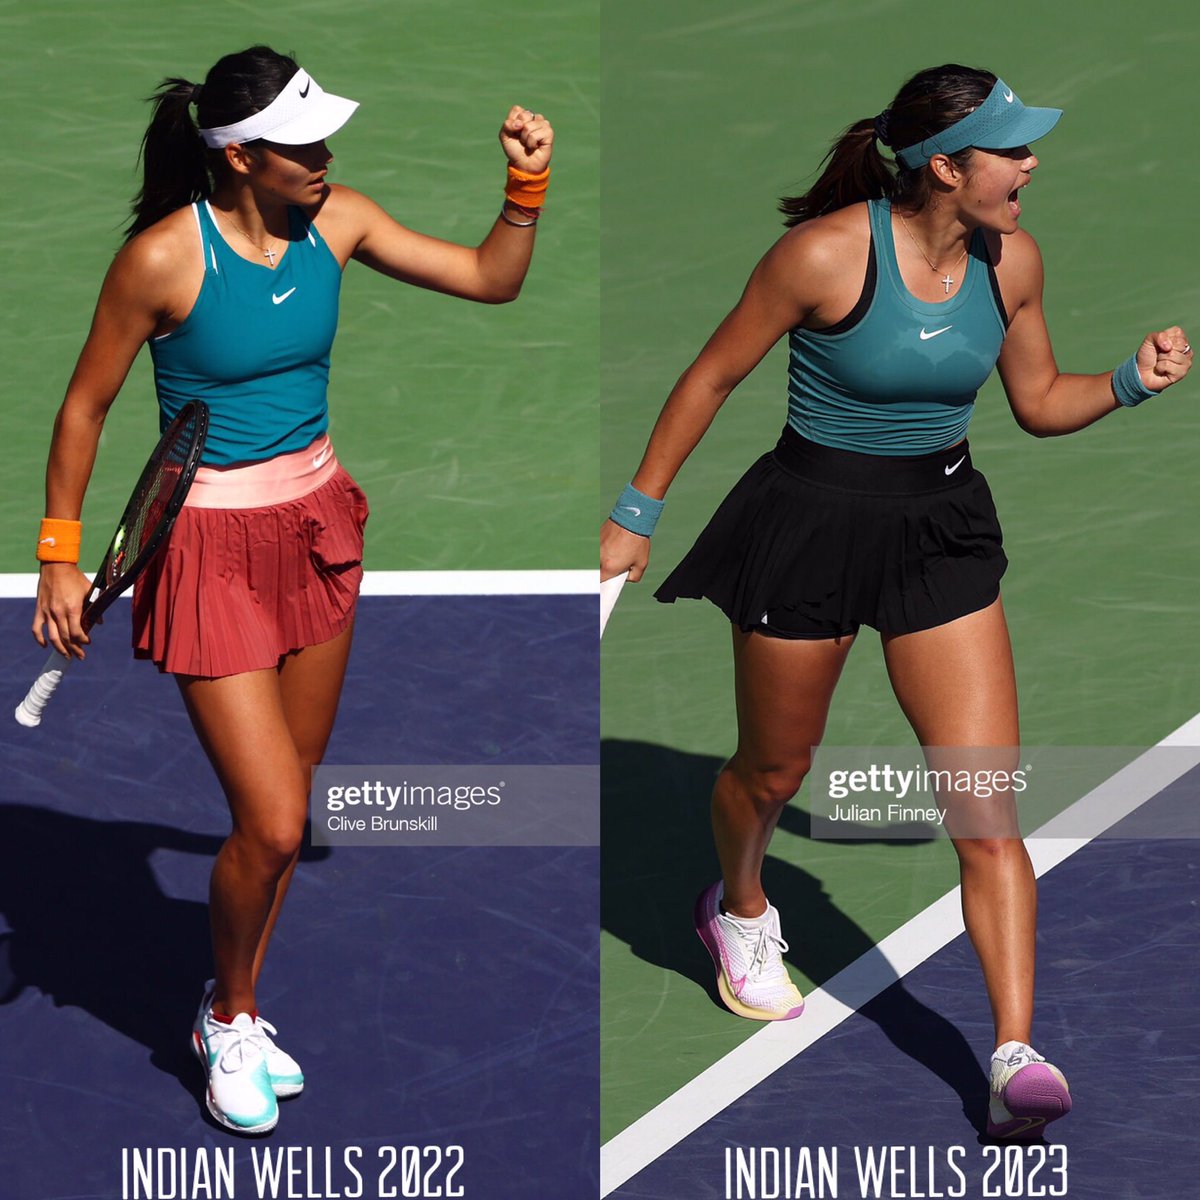 ongezond perzik Zeehaven Autistic Tennis Fan on Twitter: "Great side-by-side from @JGunn894 showing  the physical transformation of Emma Raducanu this past year. She is 💯  doing the work of building her body for tennis. It